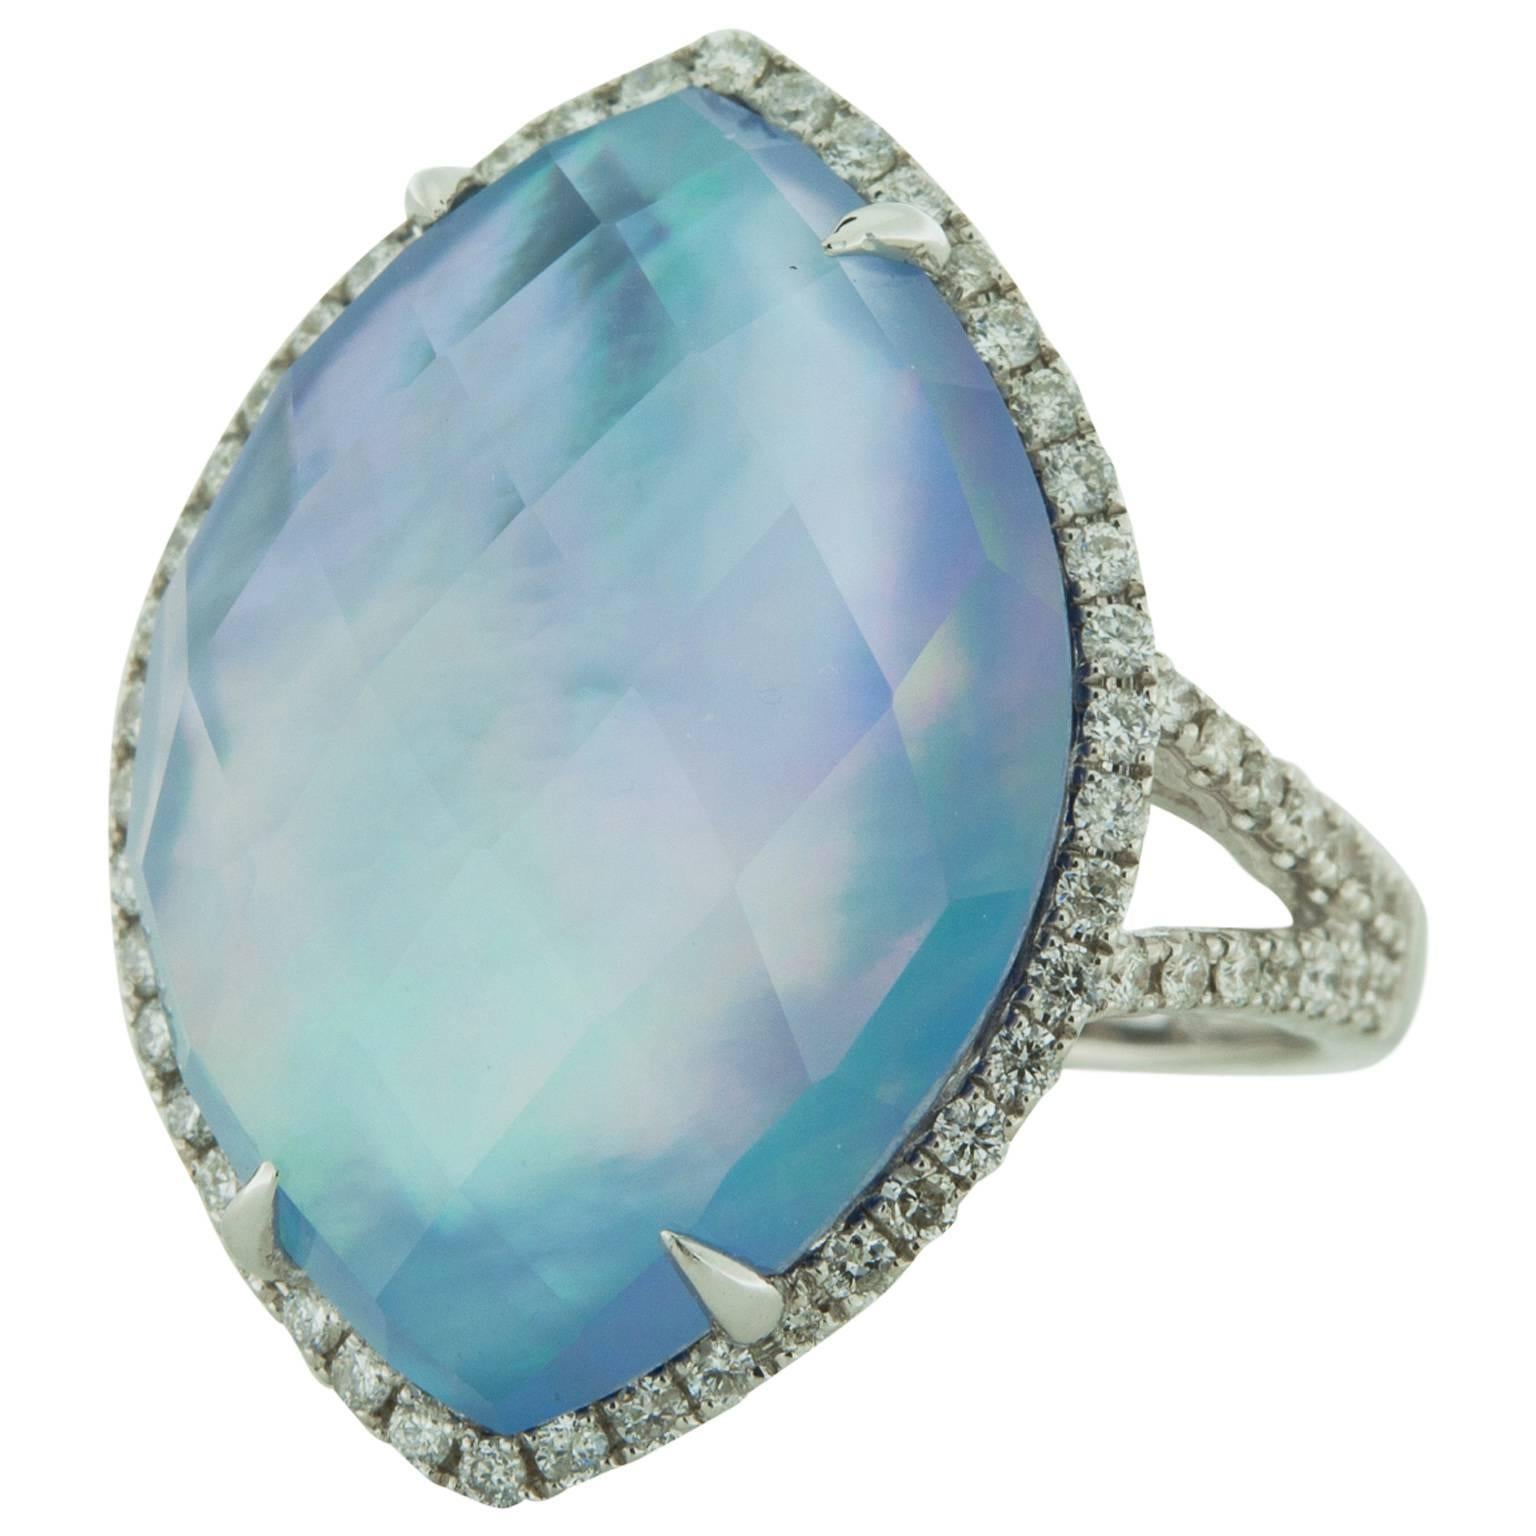 Lapis Lazuli, Mother-of-Pearl and White Topaz Triplet Ring